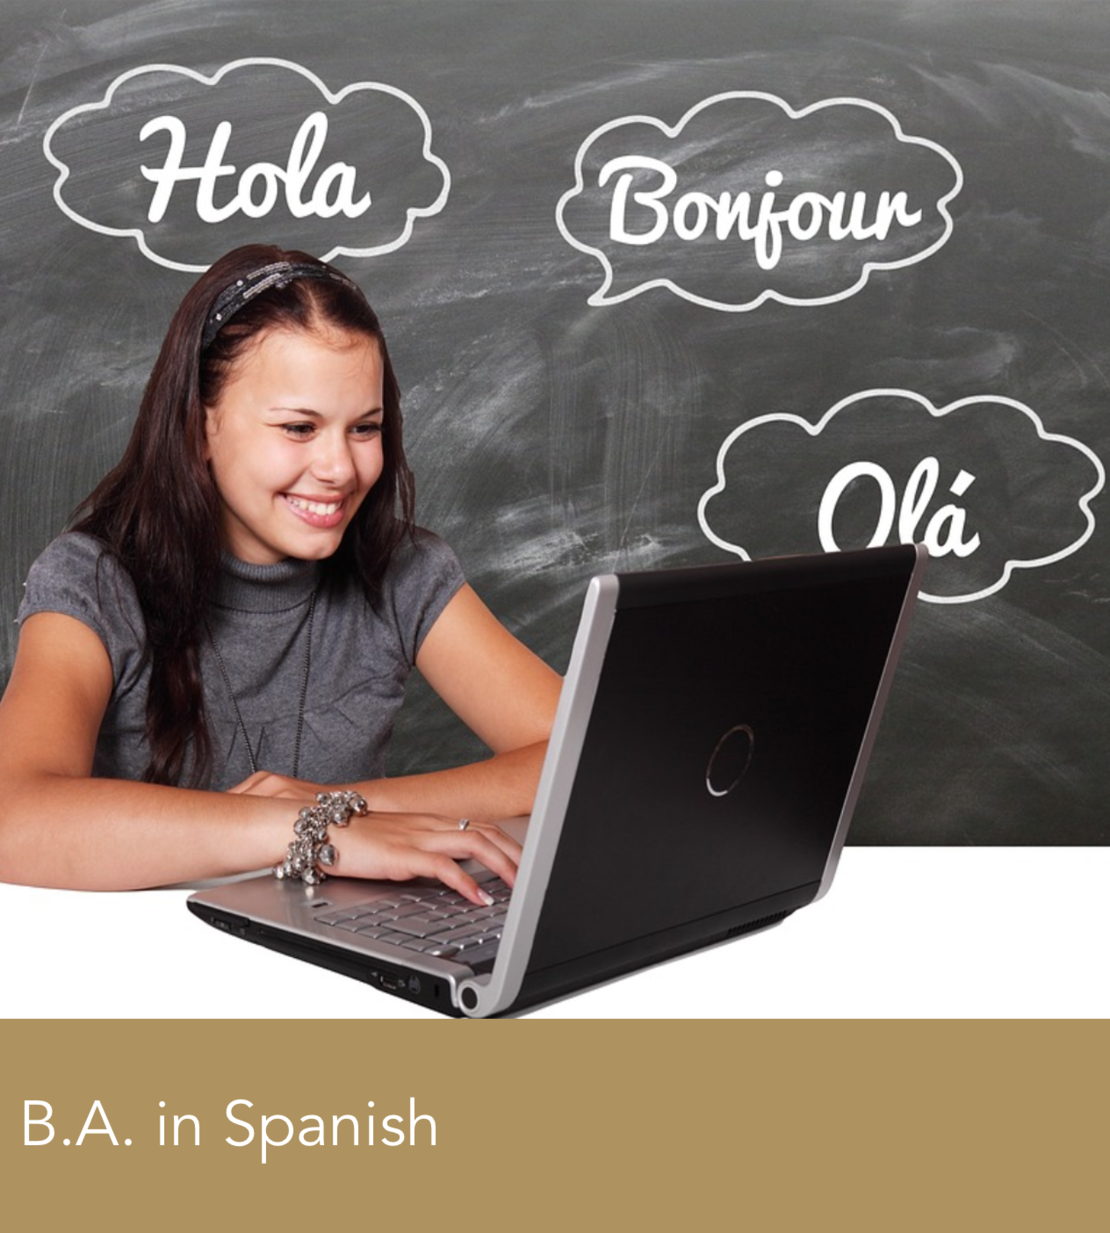 B.A. in Spanish